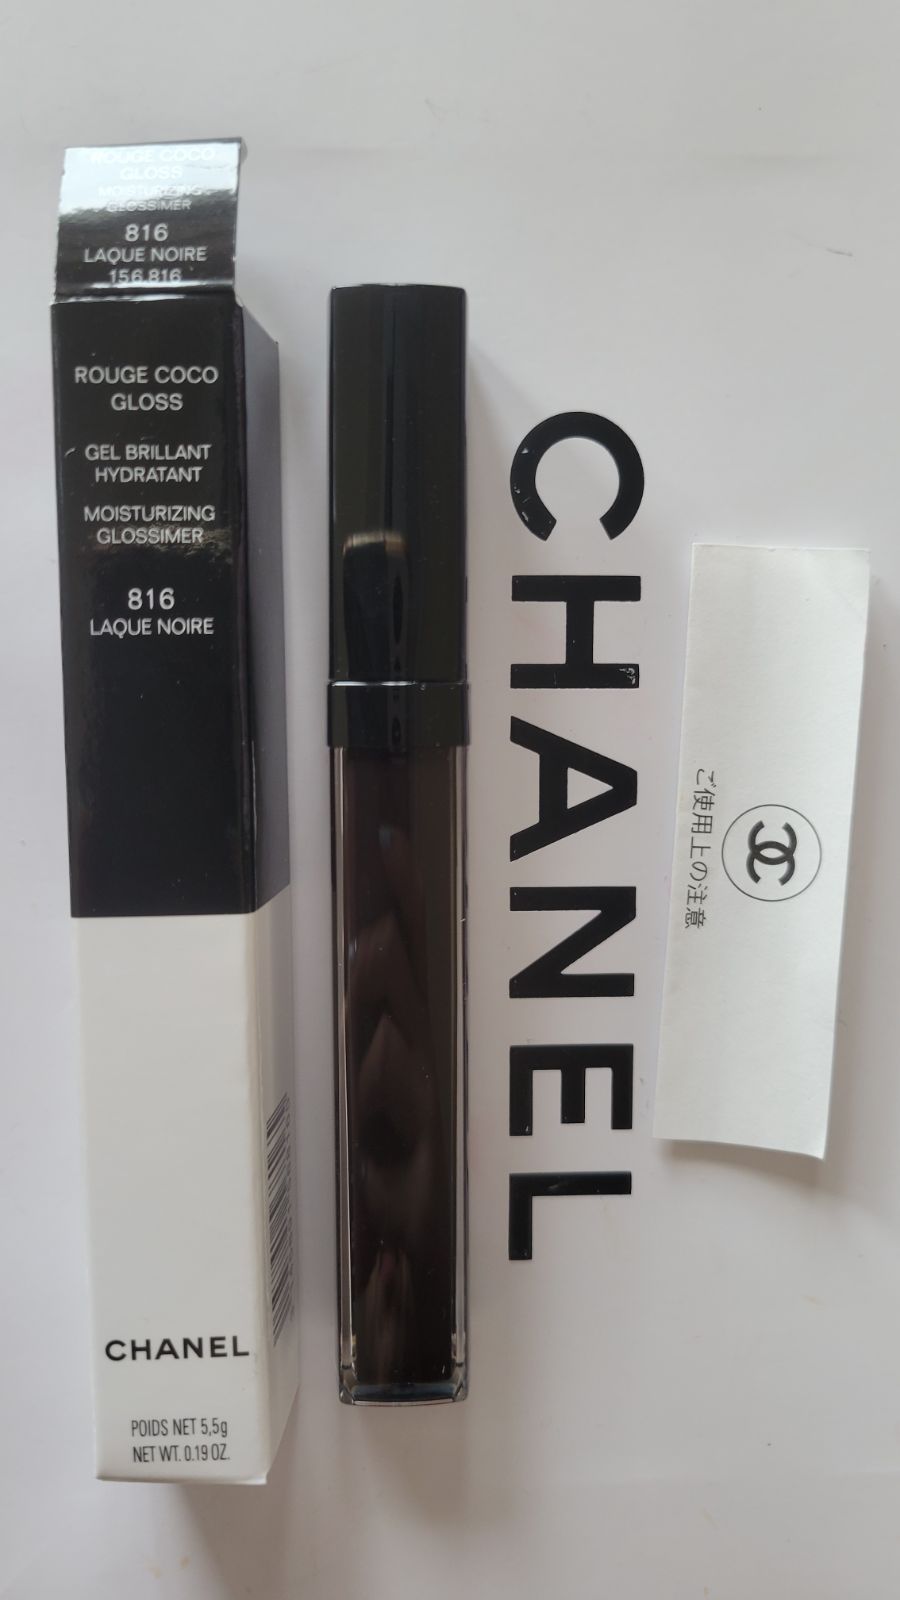 Chanel Rouge Coco Gloss Dupes & Swatch Comparisons